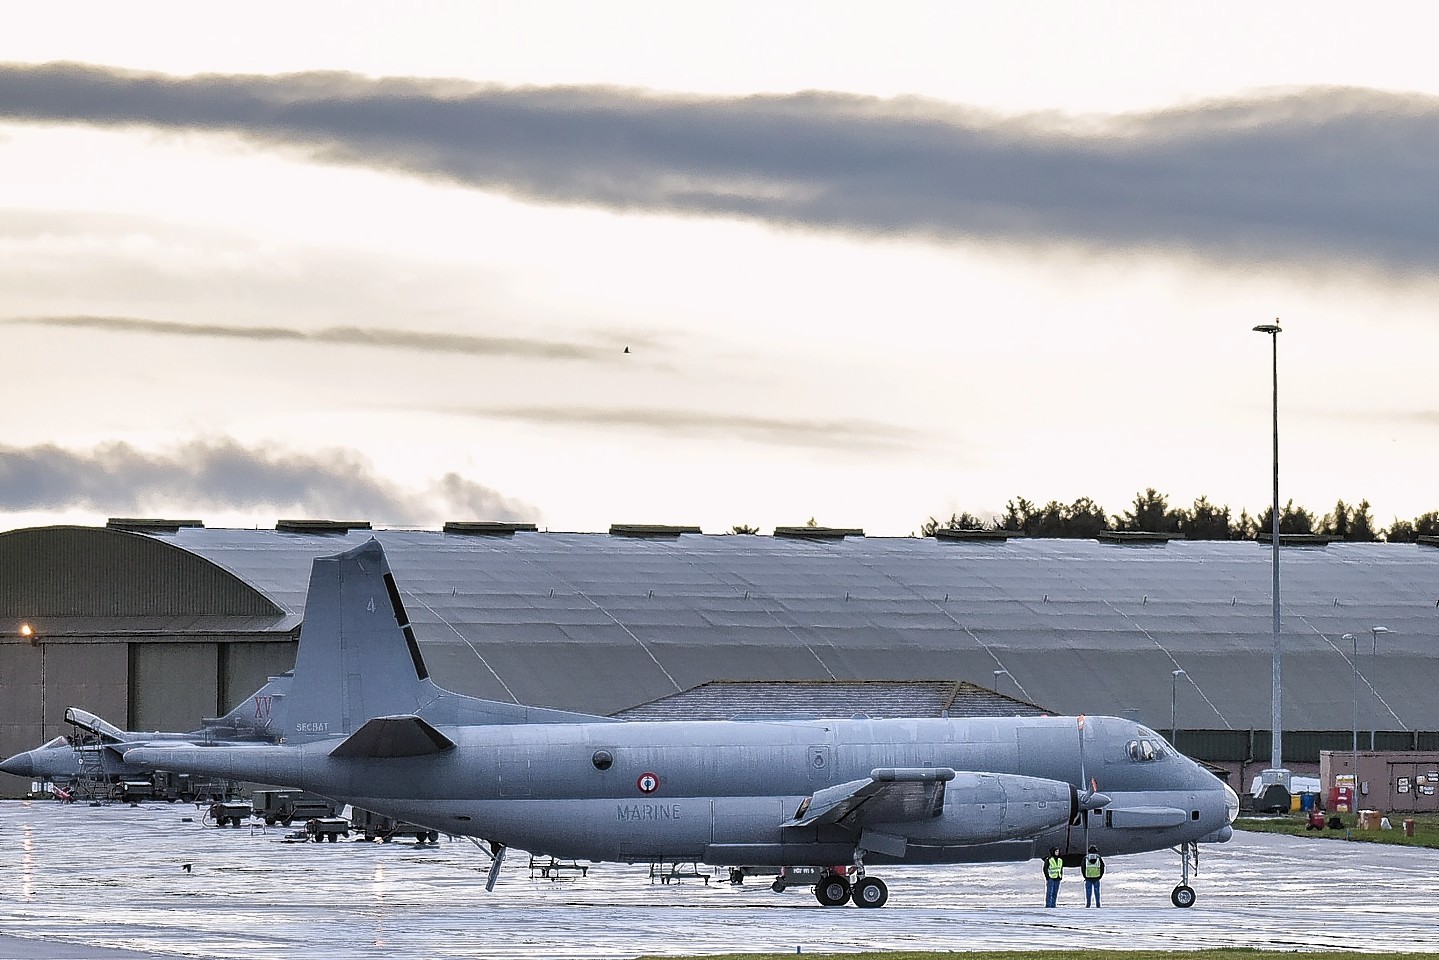 A Breguet Atlantique 2 belonging to the French Naval Avation is seen at RAF Lossiemouth